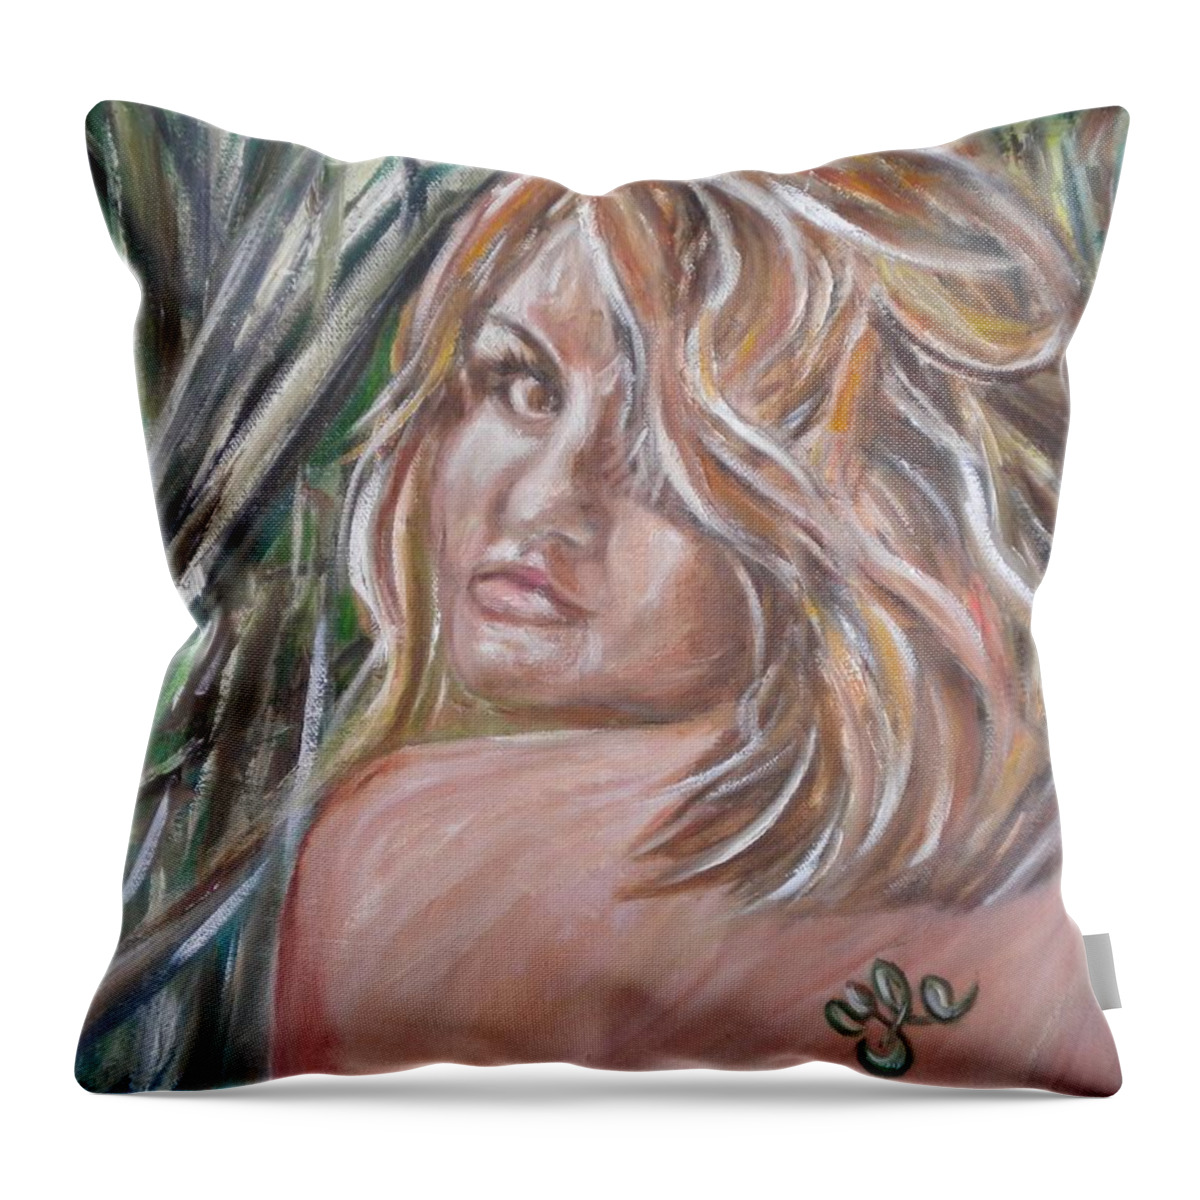 Fantasy Throw Pillow featuring the painting Jungle Nymph by Yesi Casanova